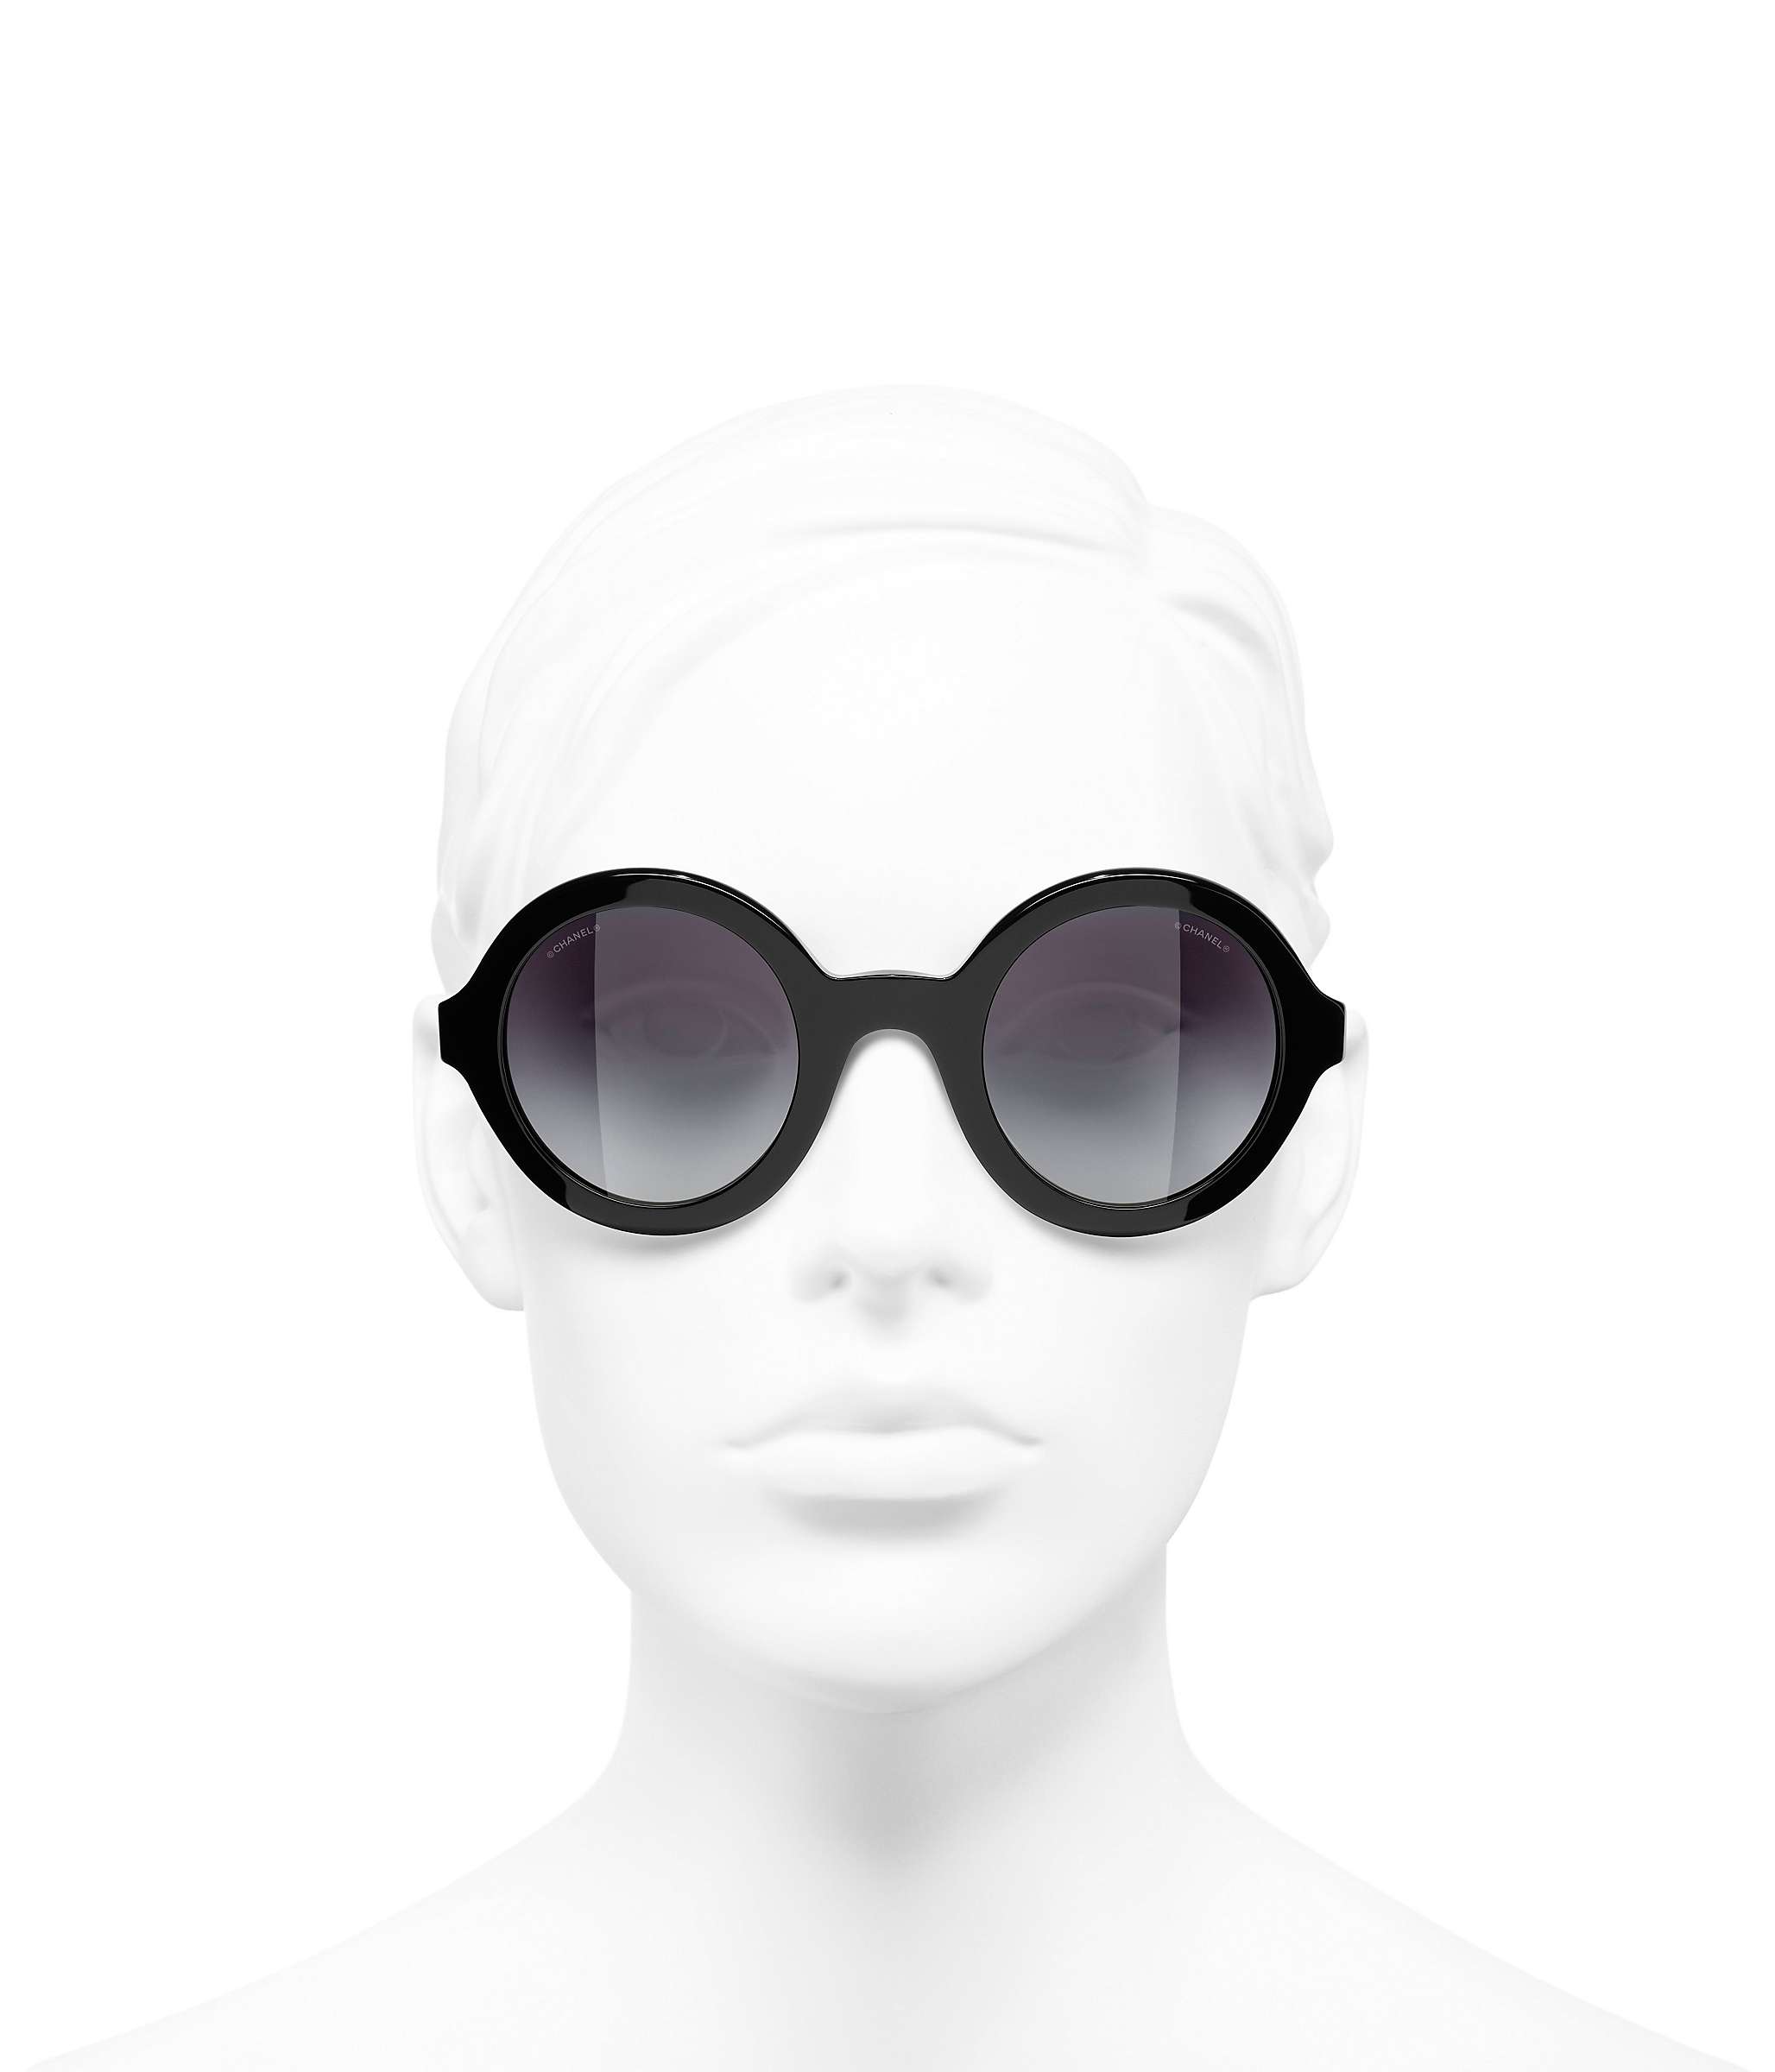 CHANEL Round Sunglasses CH5441 Black/Grey Gradient at John Lewis & Partners